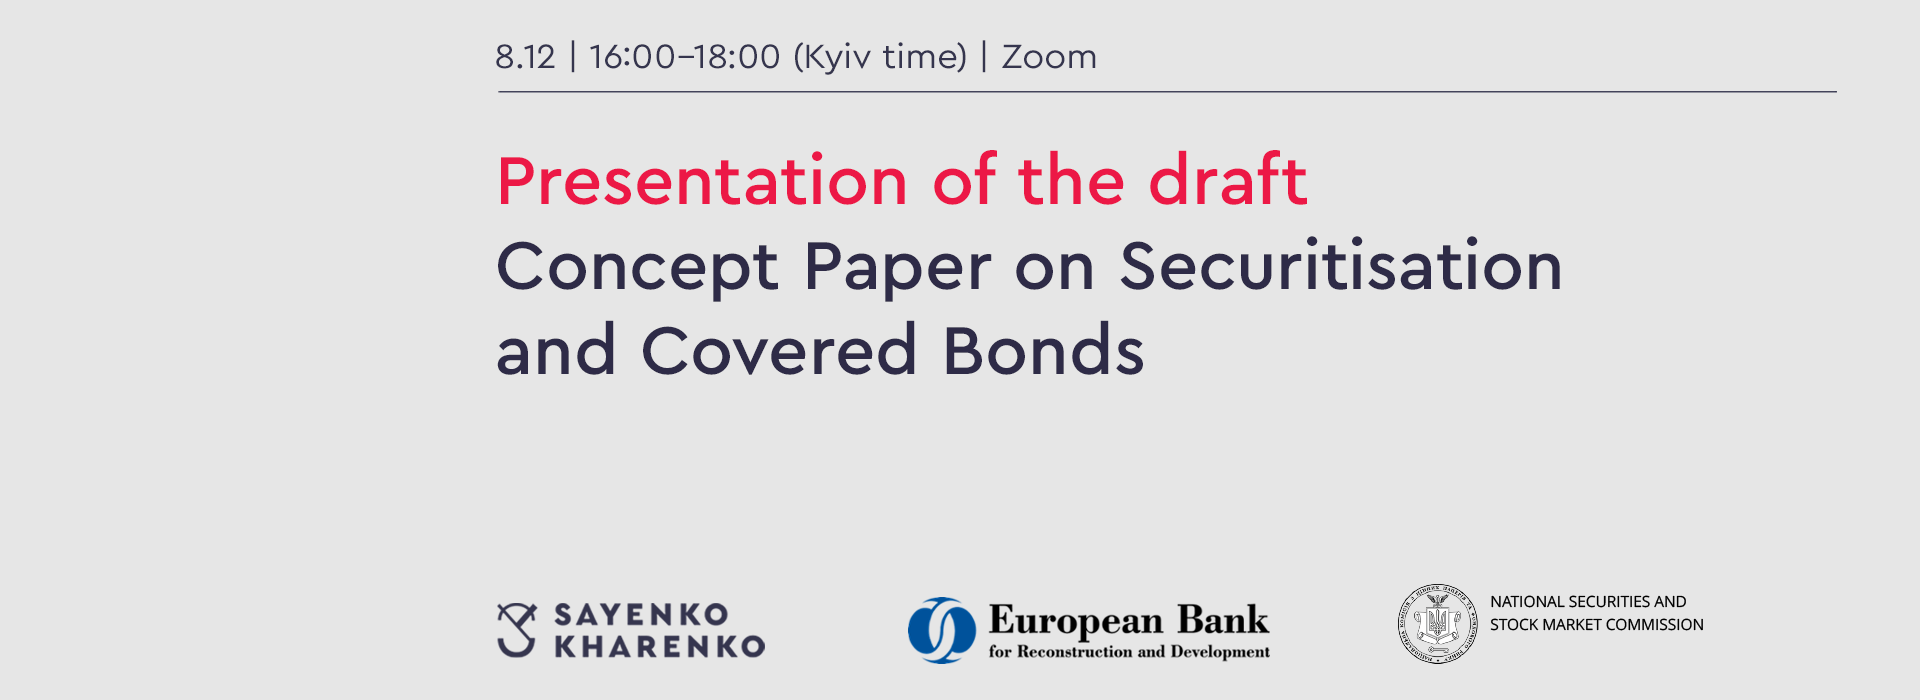 Presentation of the draft Concept Paper on Securitisation and Covered Bonds